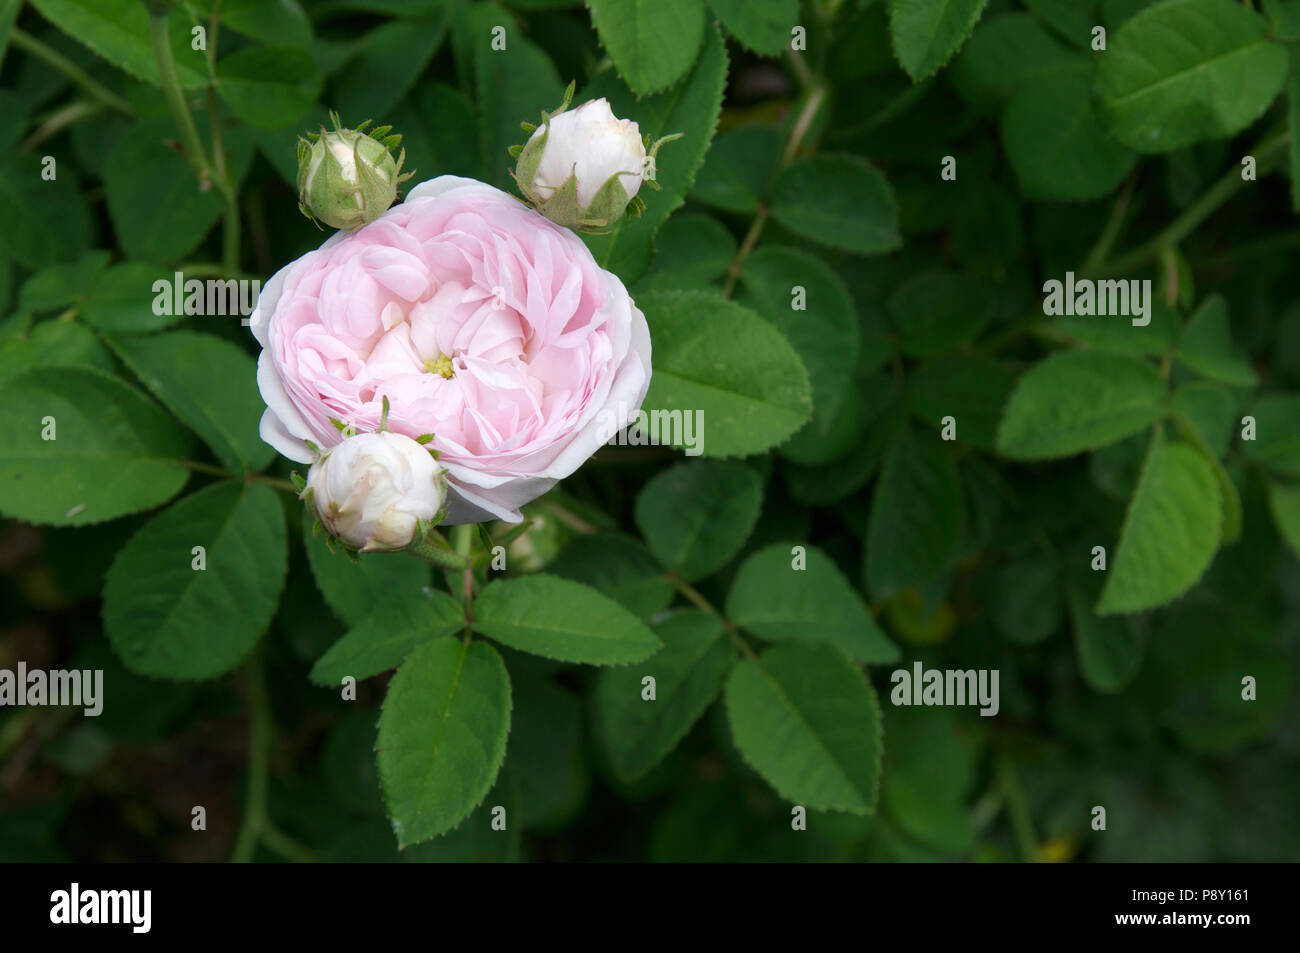 Pale pink double rose Stock Photo